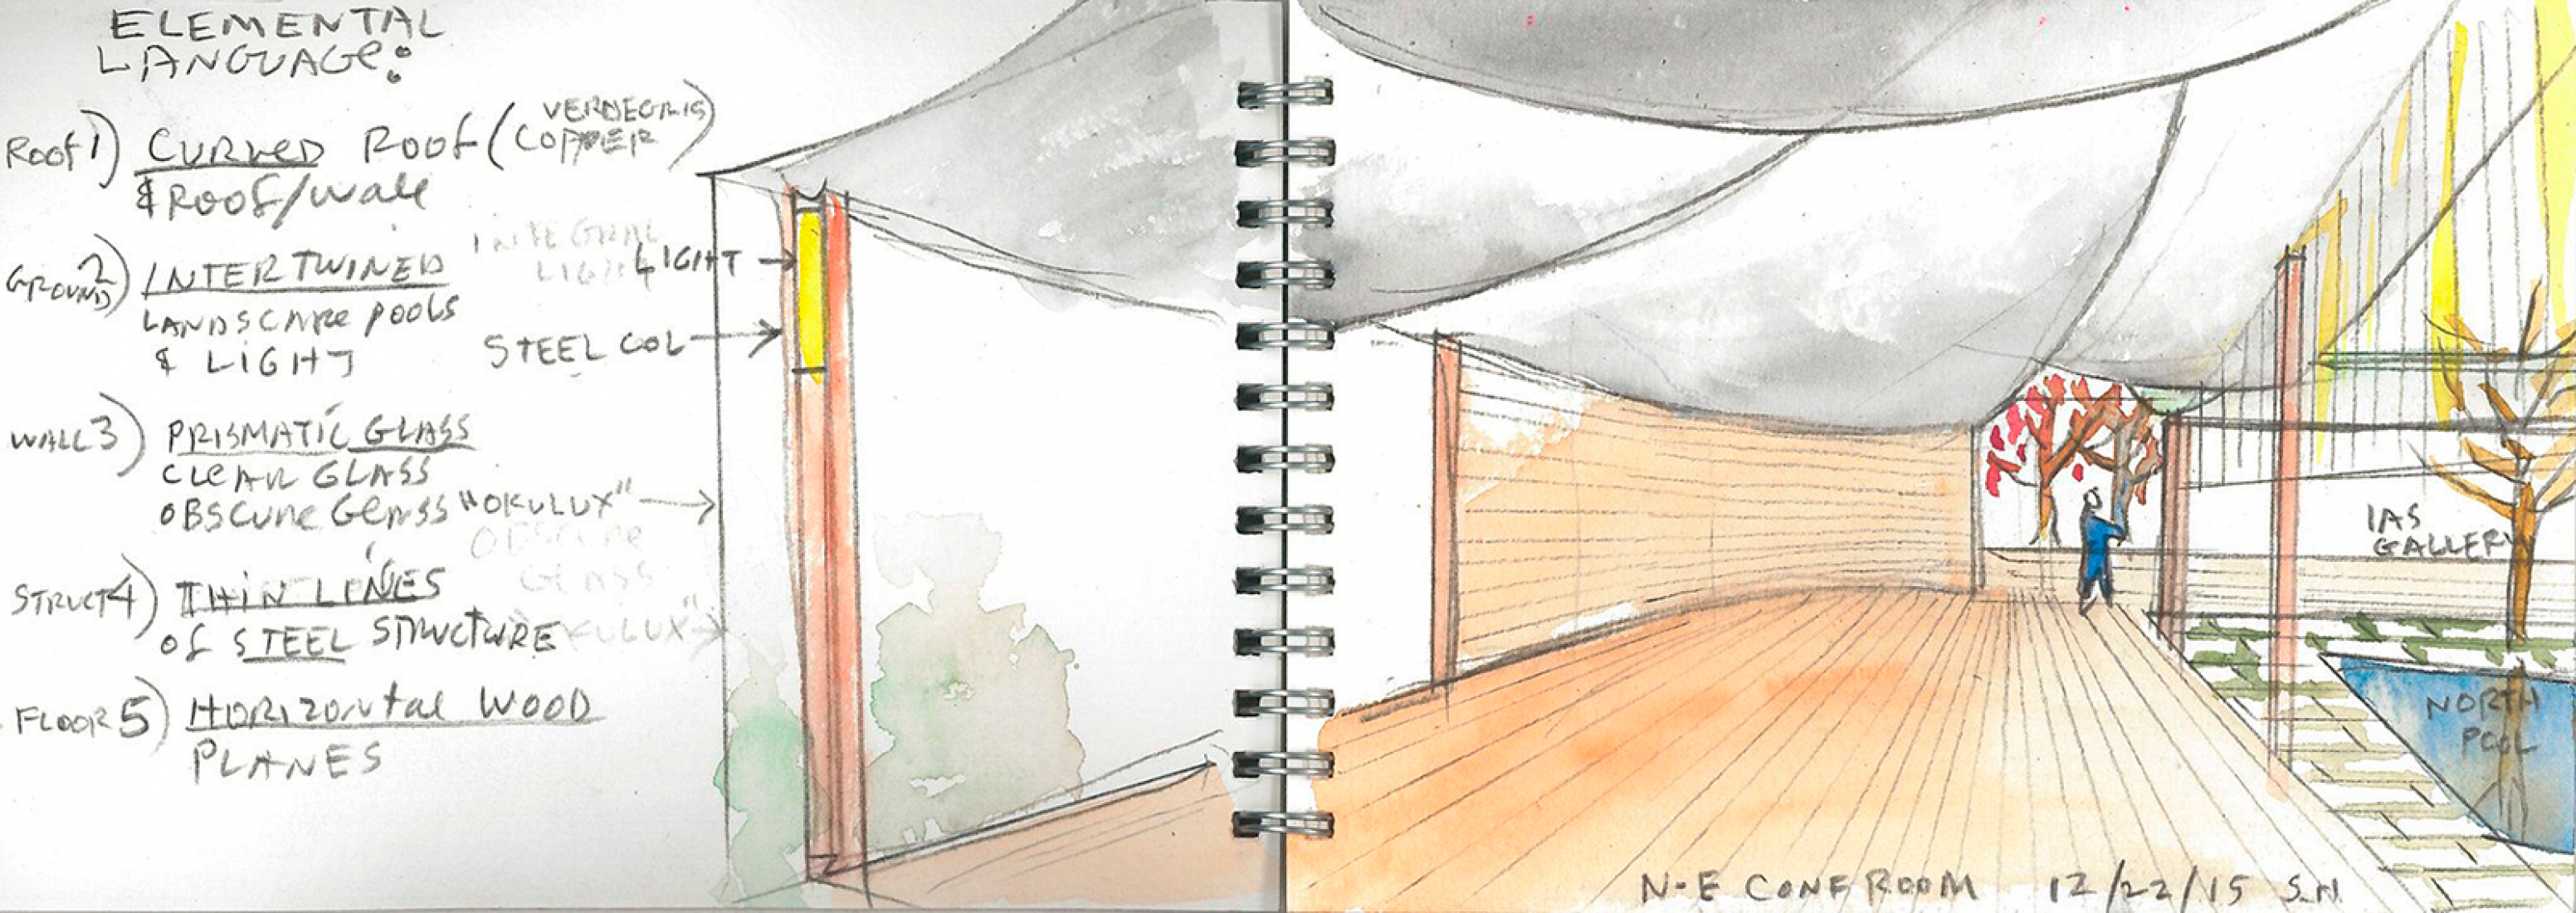 Steven Holl’s watercolor concept sketches for the Rubenstein Commons at the Institute for Advanced Study.